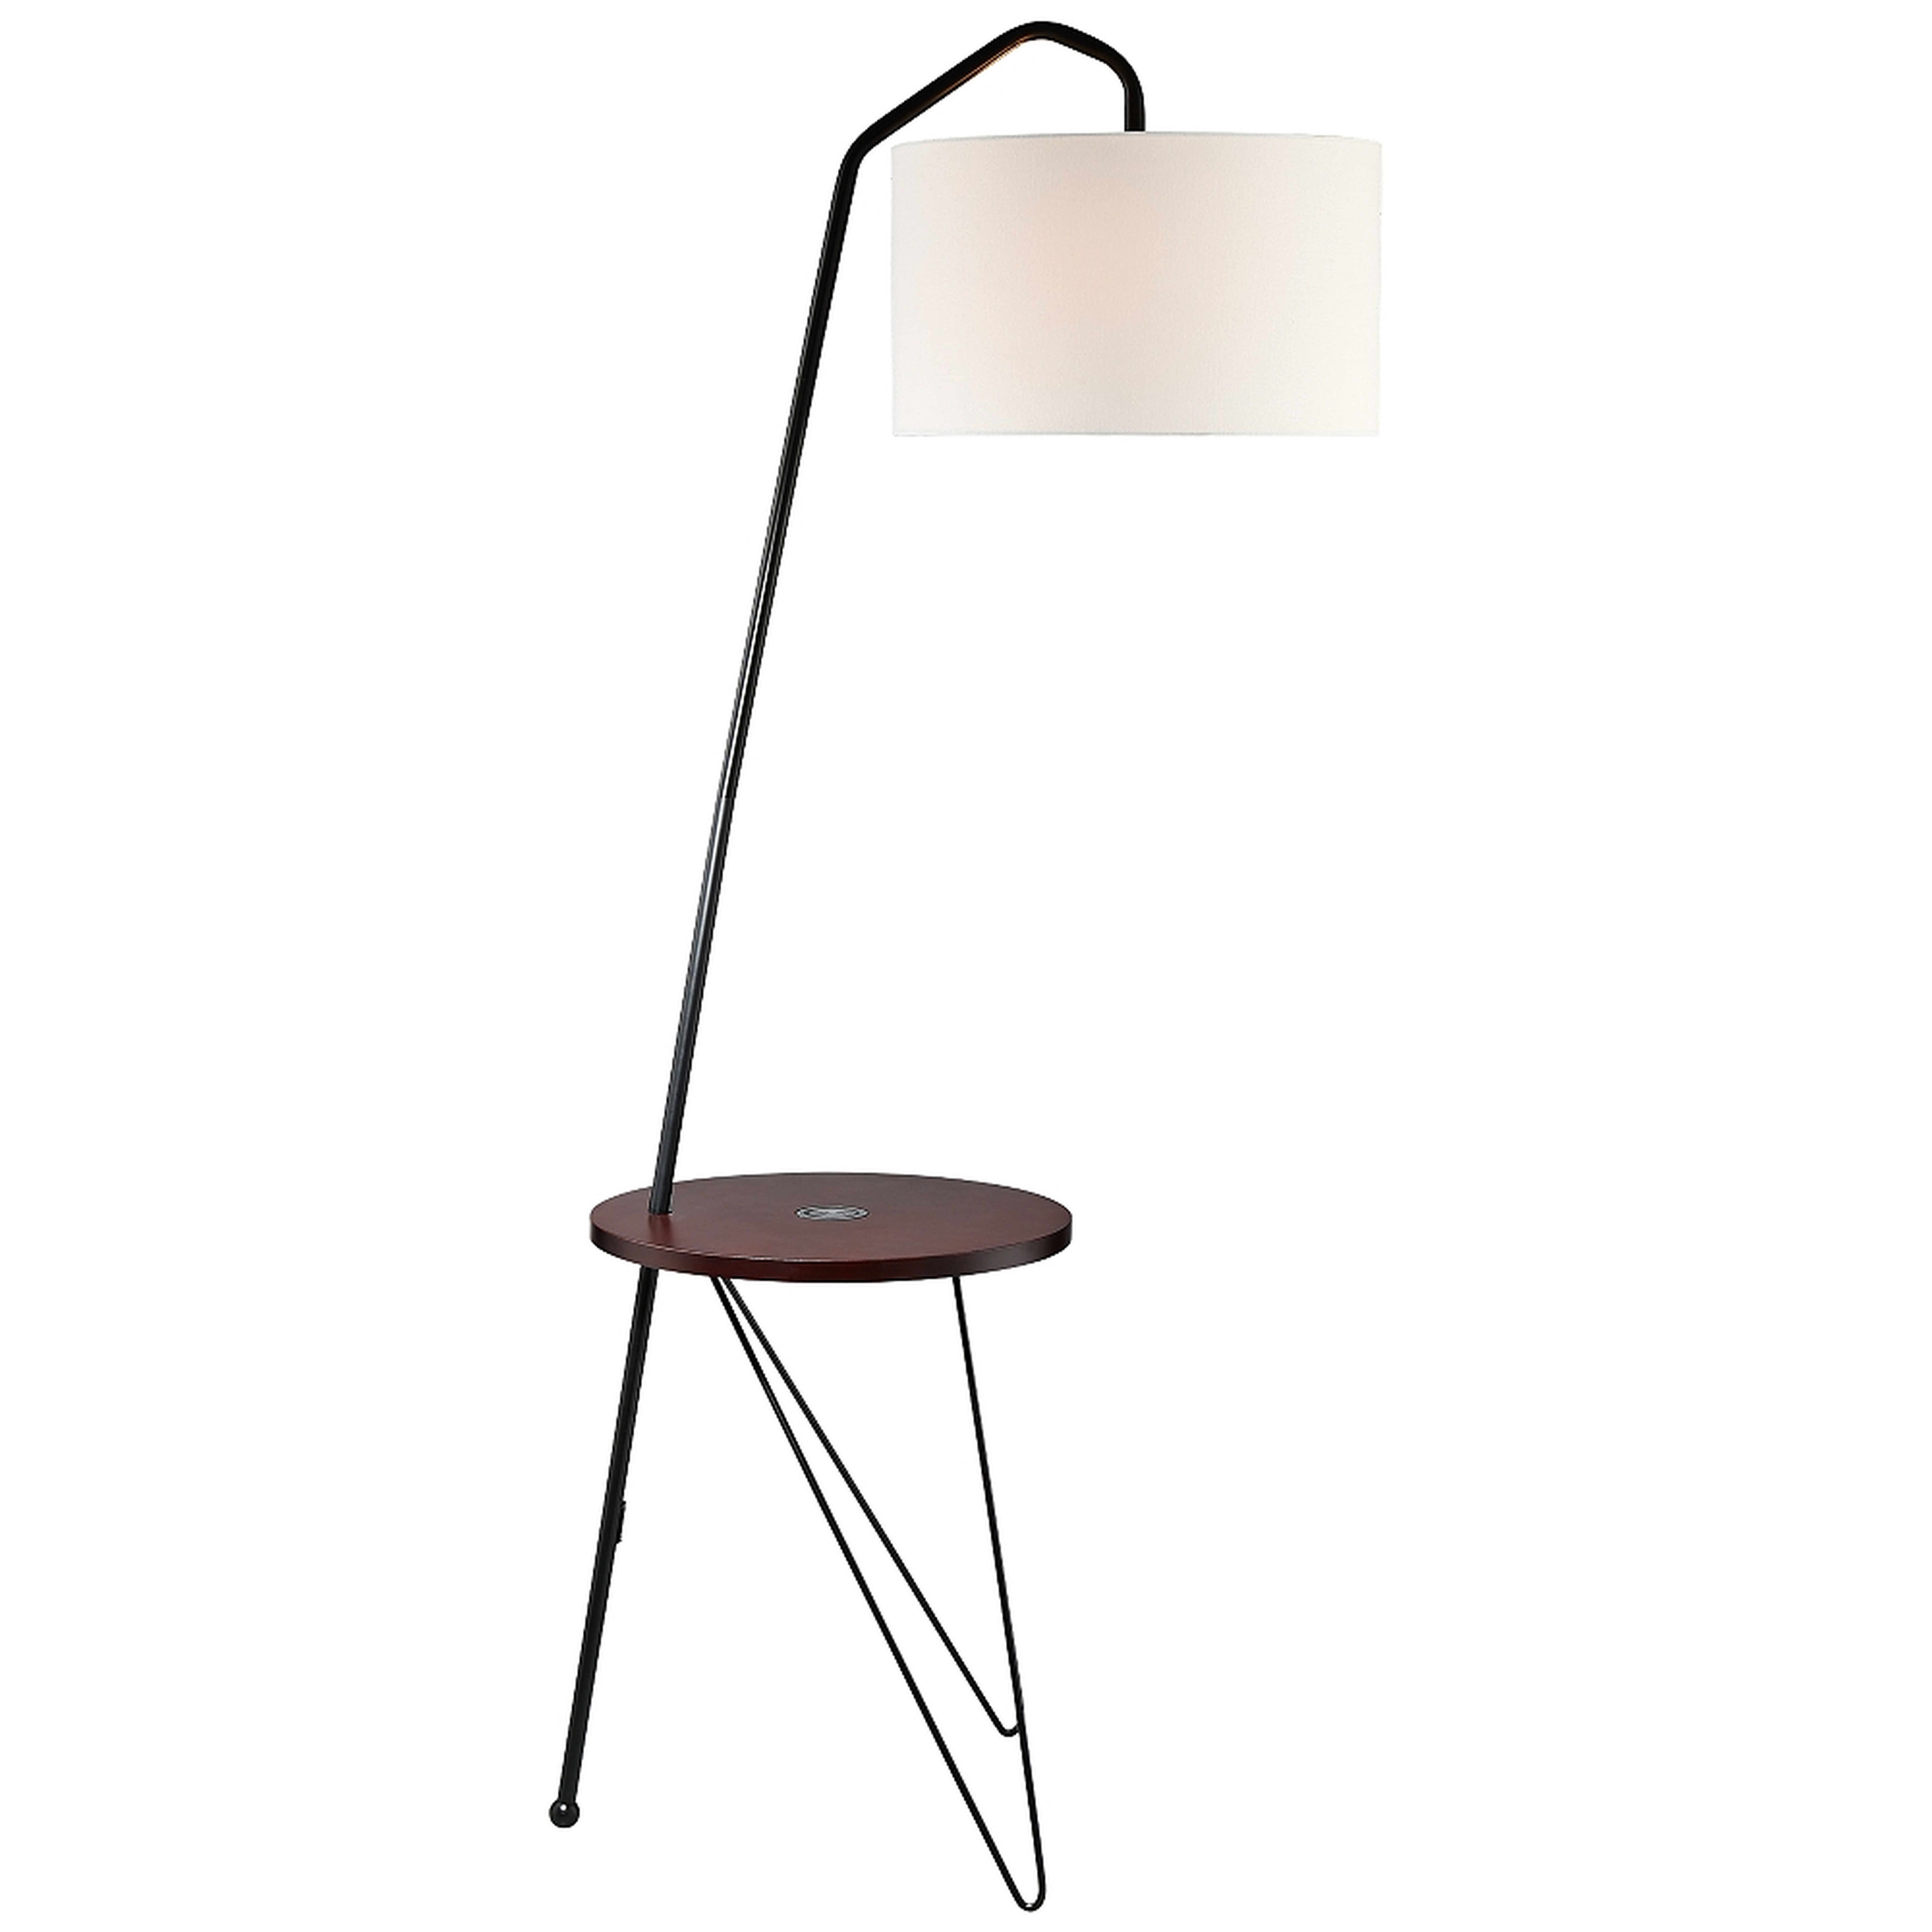 Lite Source Rutherford Black Floor Lamp with Tray Table - Style # 69G12 - Lamps Plus